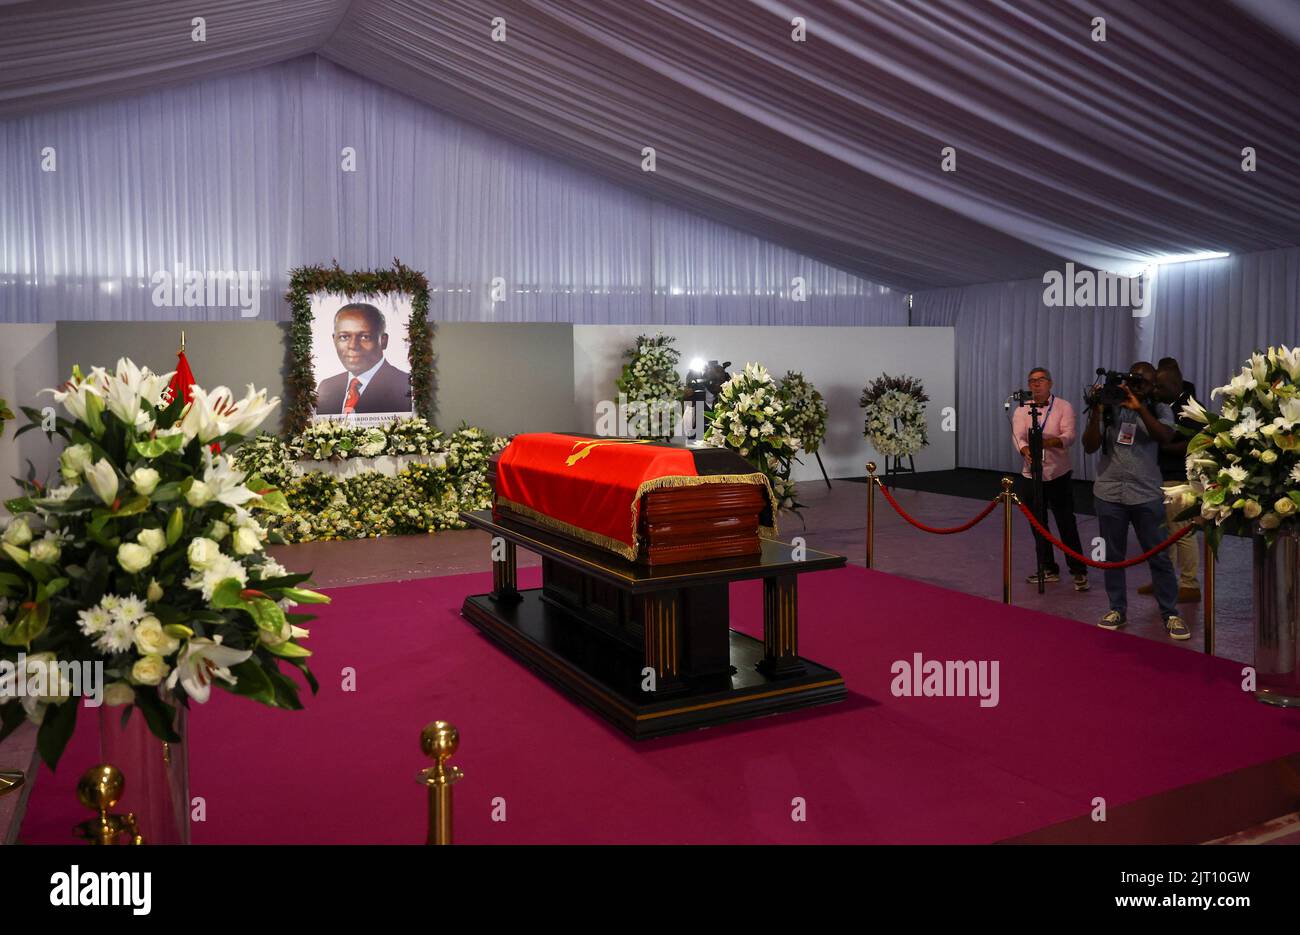 A casket carrying the body of Angola's former President Jose Eduardo dos Santos, who died in Spain in July, lies at the Agostinho Neto Memorial in Luanda, August 27, 2022. REUTERS/Siphiwe Sibeko Stock Photo